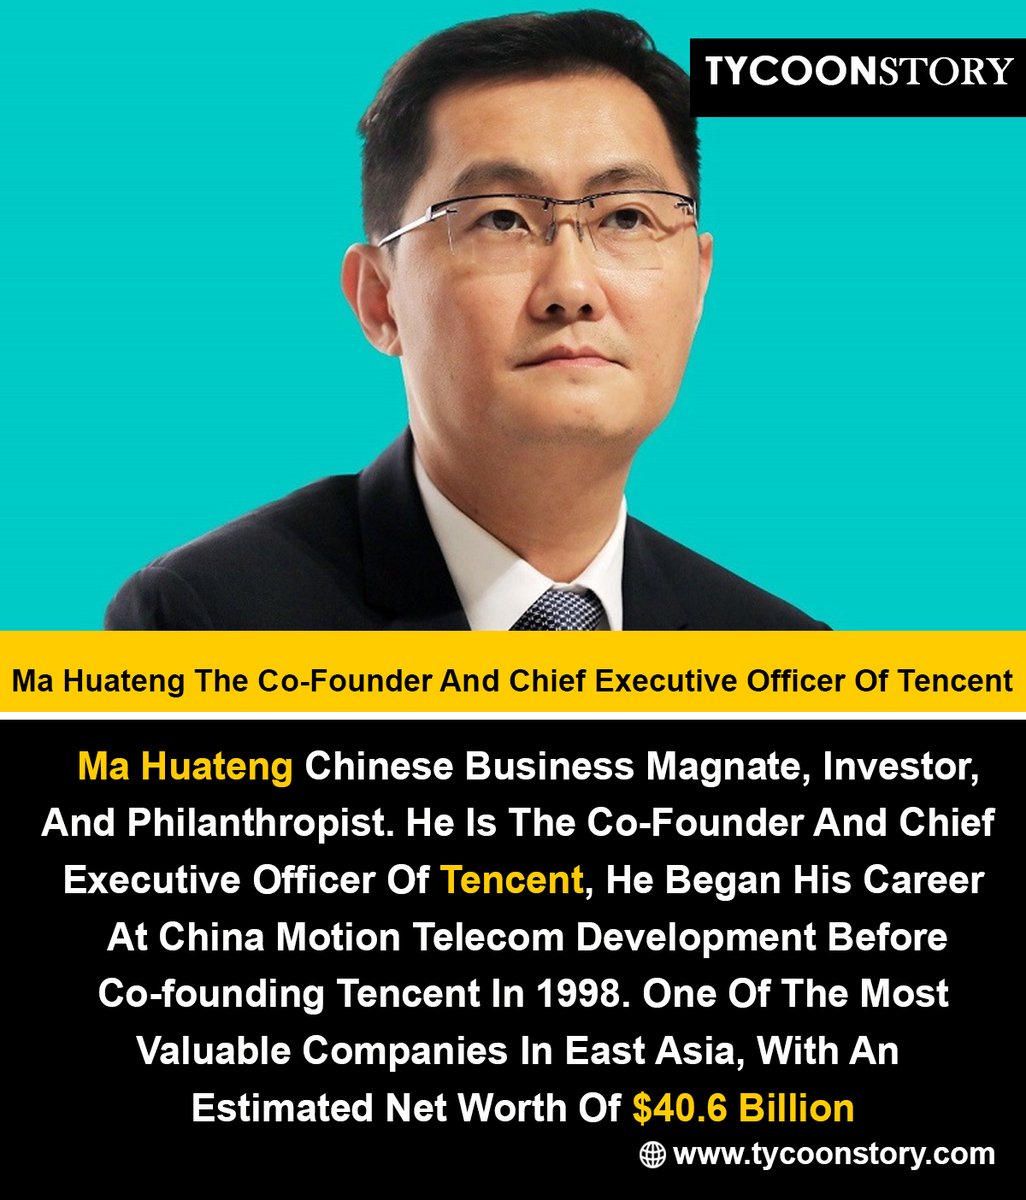 Ma Huateng The Co-Founder And Chief Executive Officer Of Tencent #MaHuateng #PonyMa #Tencent #TechLeaders #ChineseTech #TechInnovation #TechEntrepreneur #BusinessLeader #CEO #Entrepreneurship #Technology #TechIndustry #BusinessSuccess @TencentGlobal tycoonstory.com